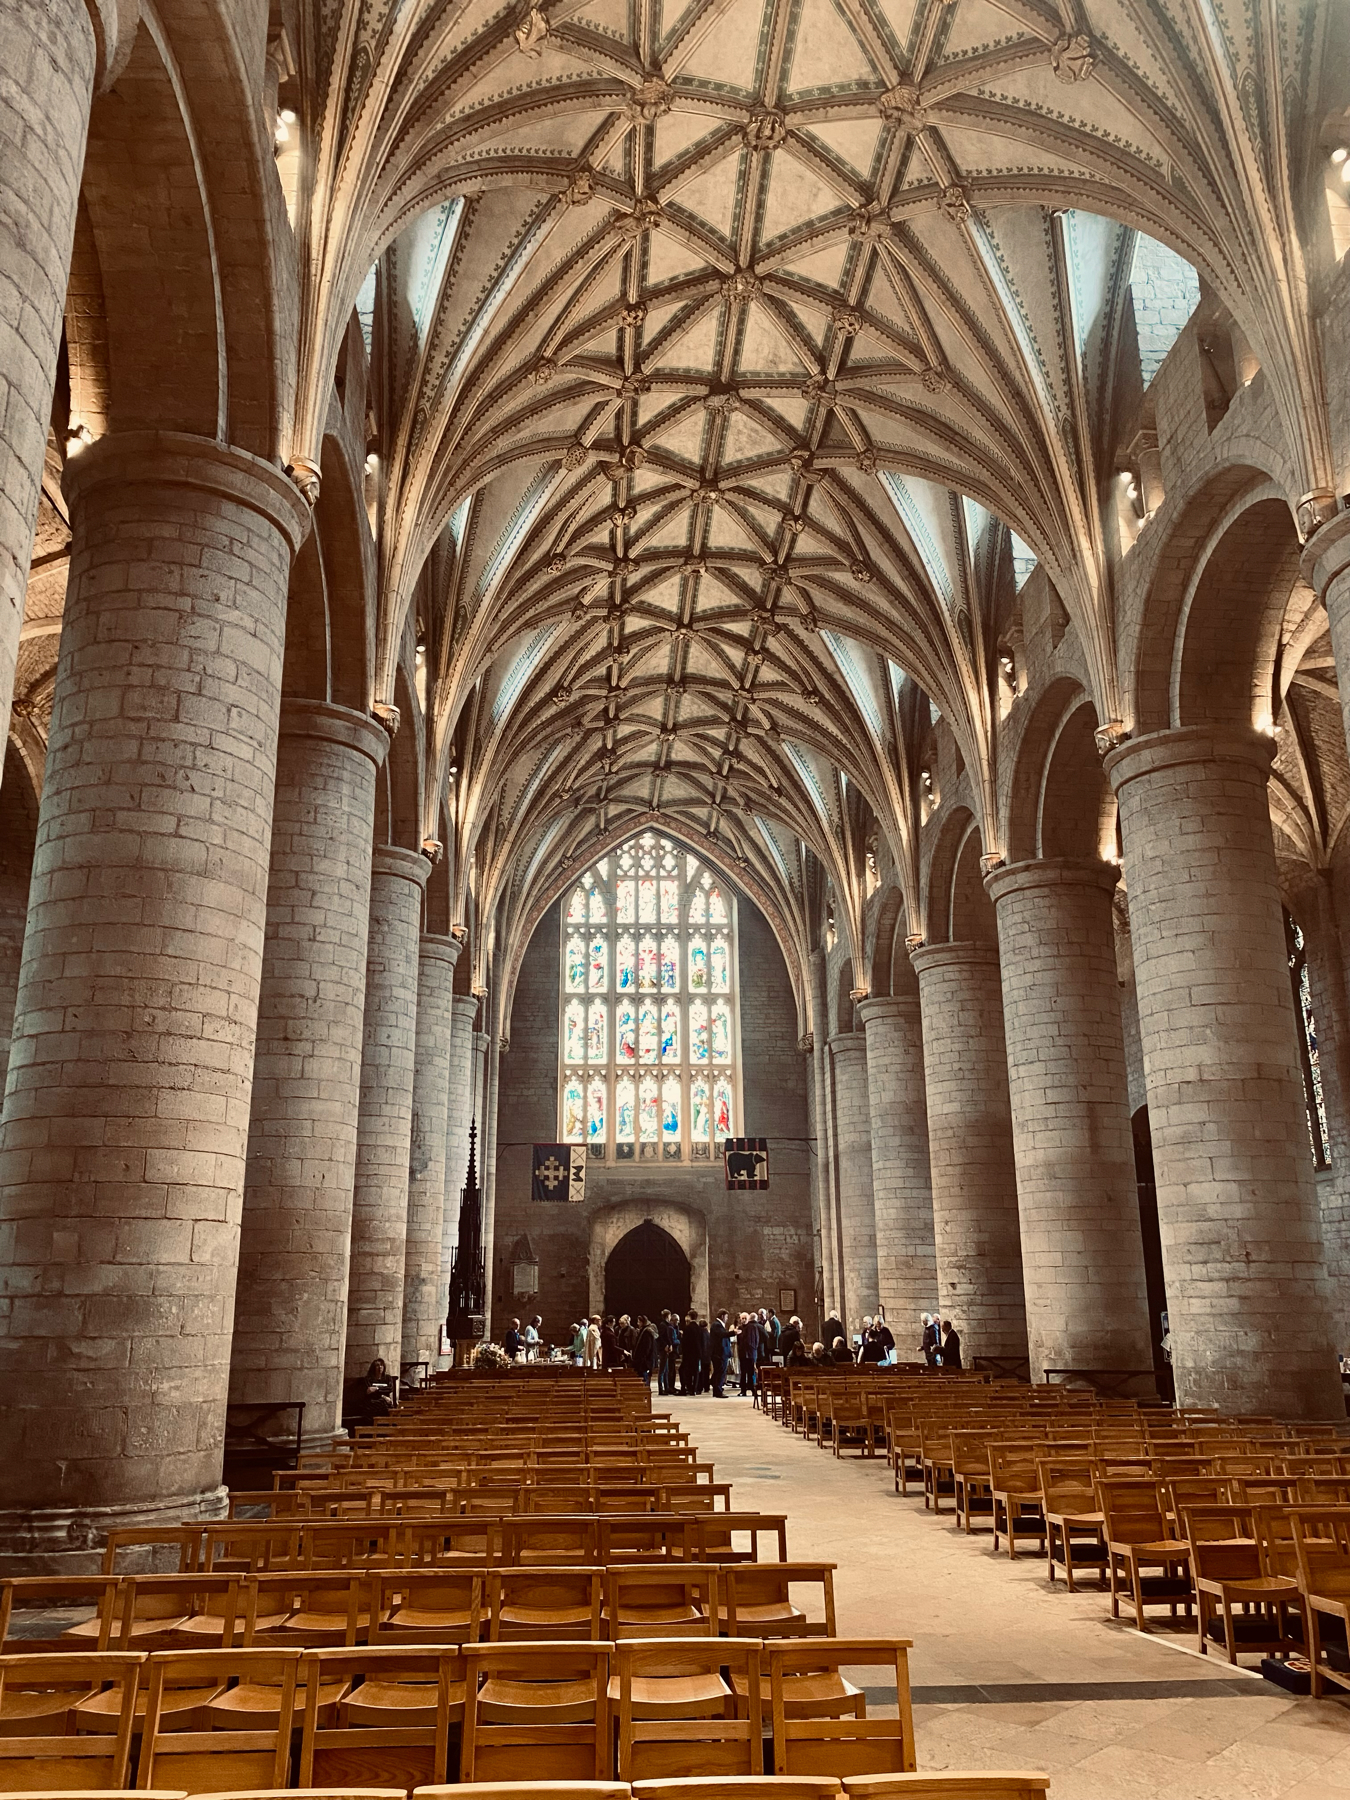 Interior of a Gothic cathedral showing vaulted ceilings, stained glass windows, stone columns, and rows of wooden chairs.